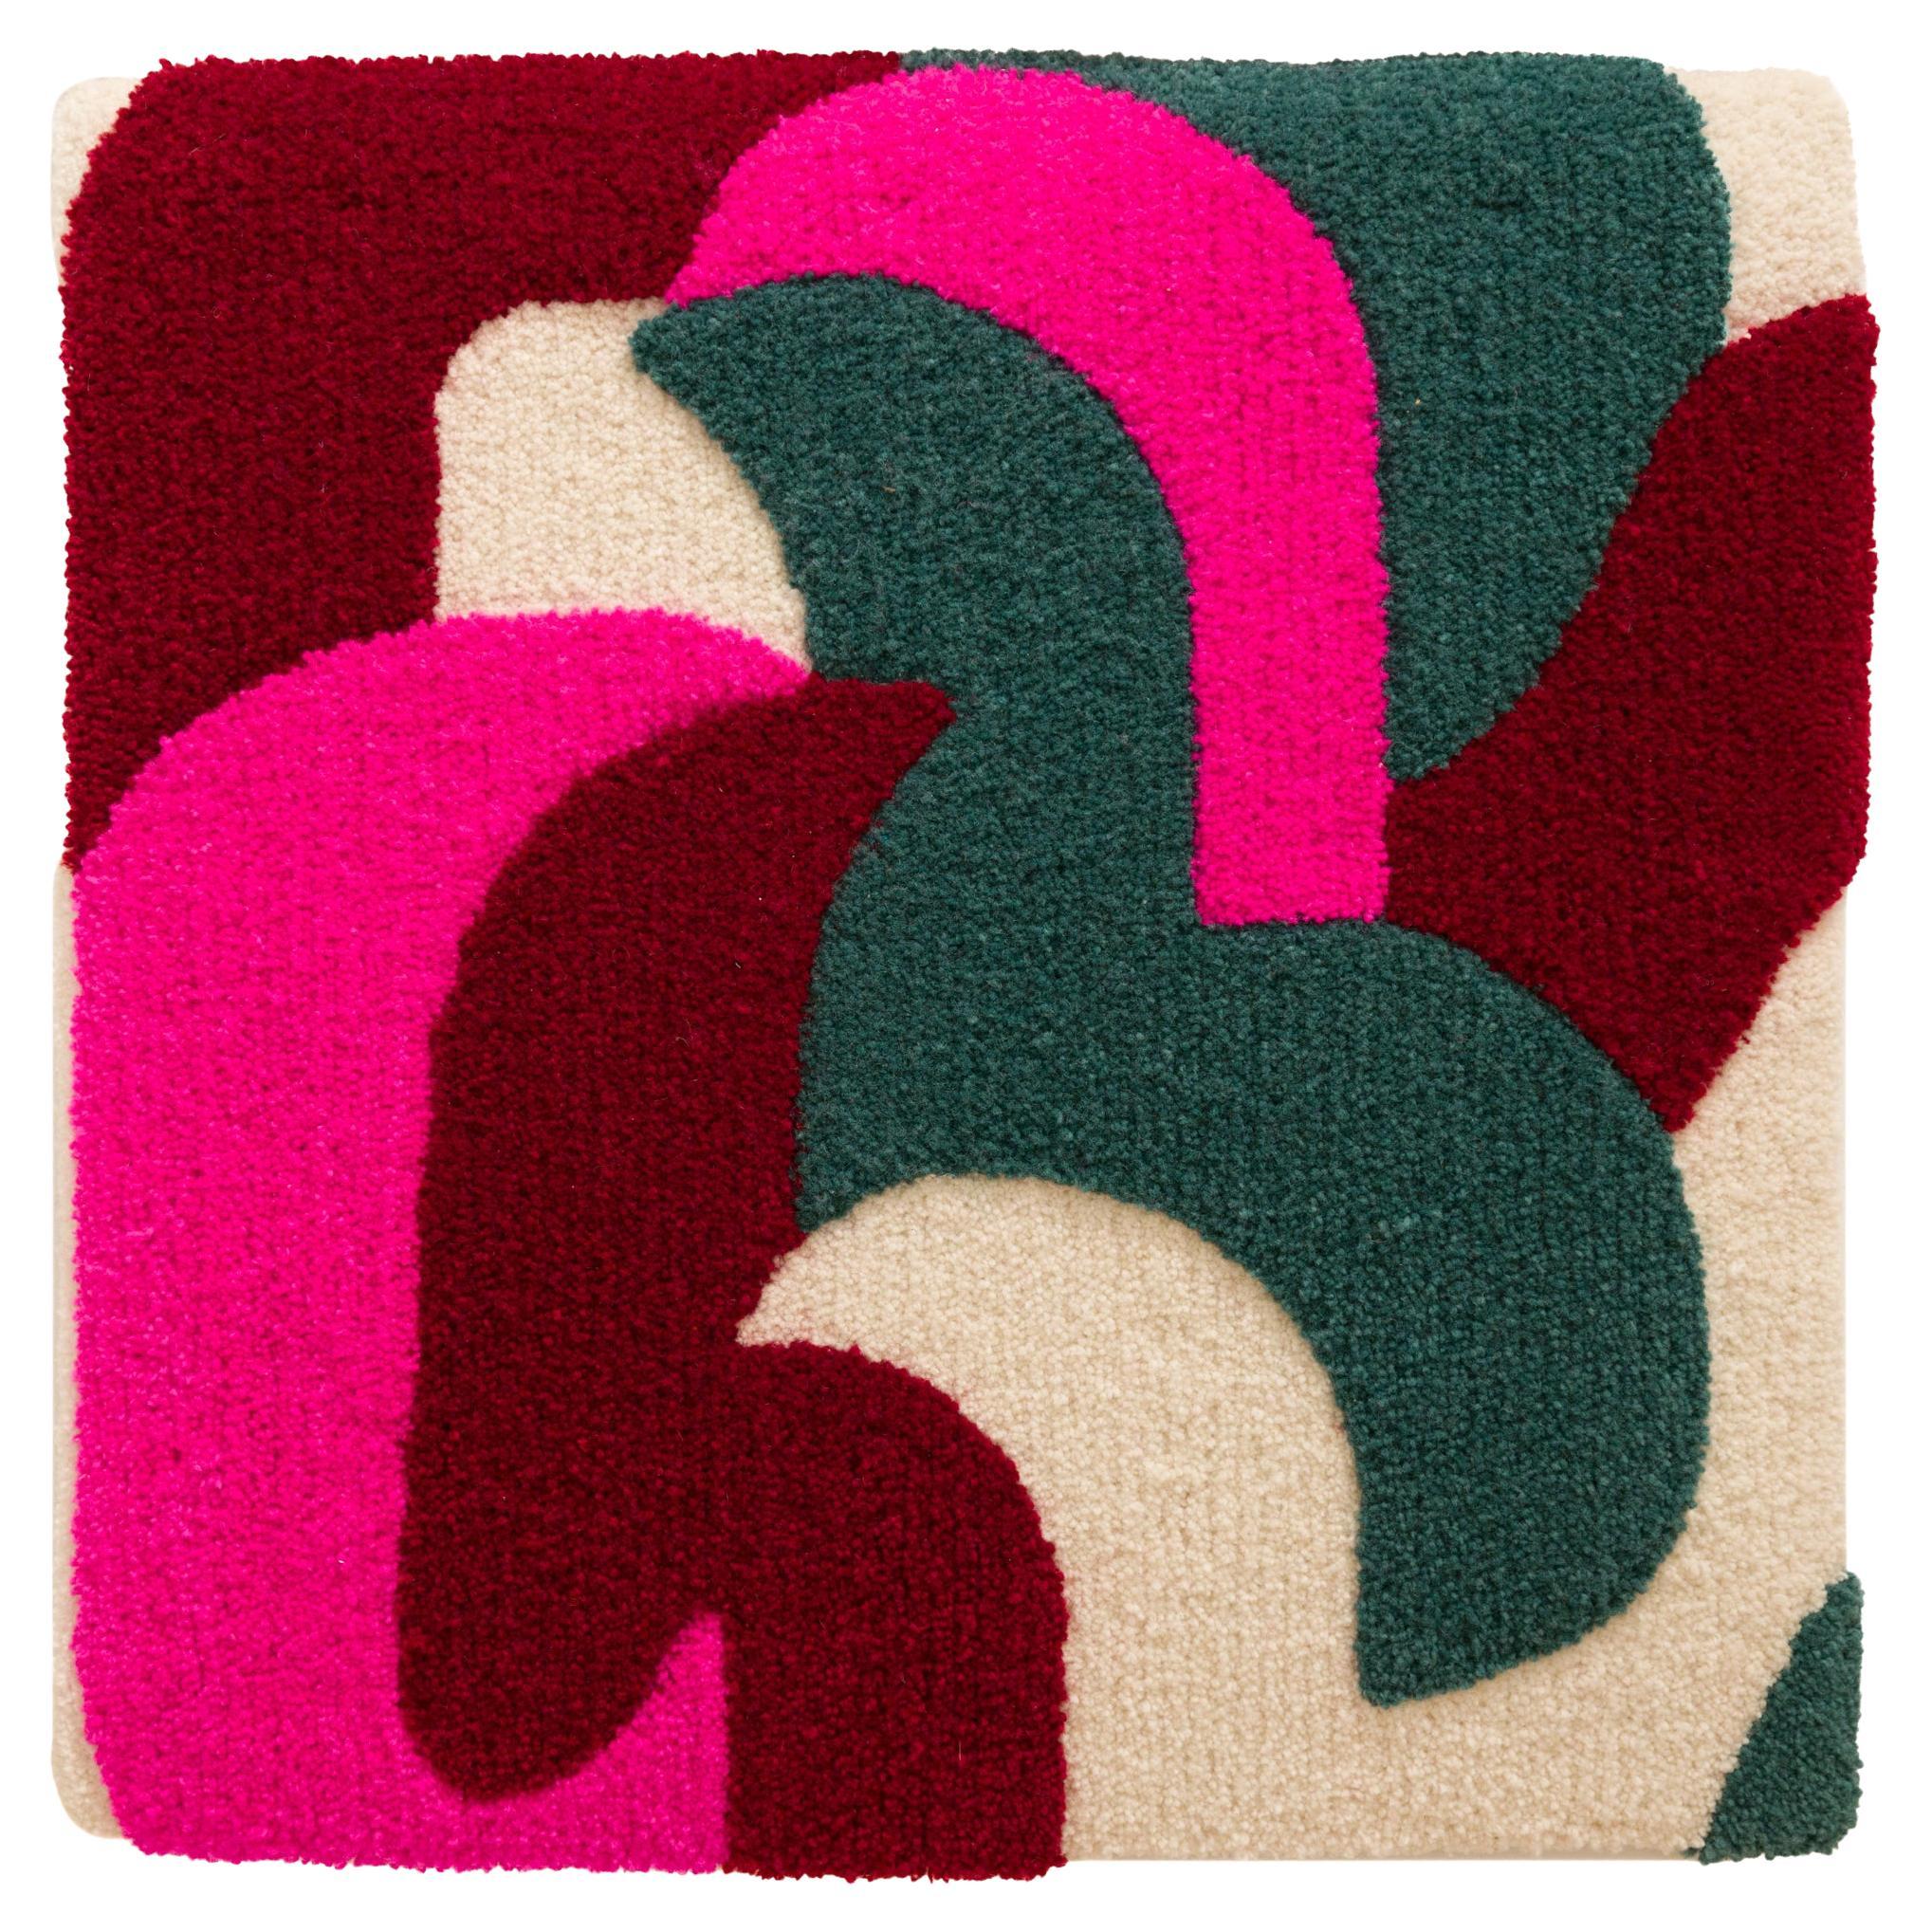 Abstract Color block Tapestry or Rug, Tufted New Zealand Wool